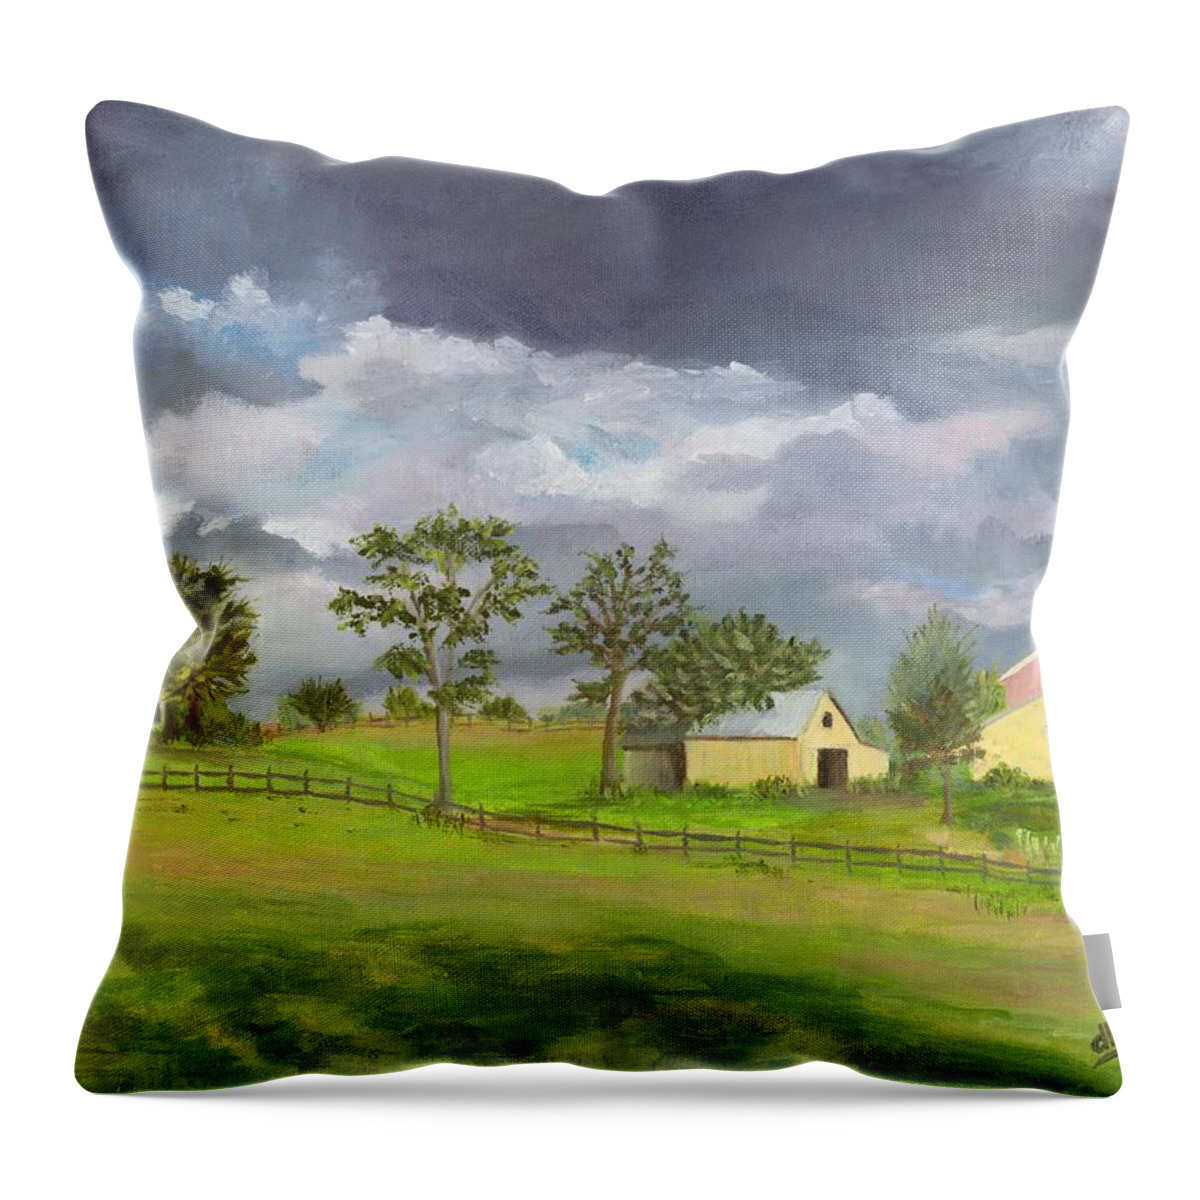 Landscapes Throw Pillow featuring the painting Clouds over the Farm by Deborah Butts